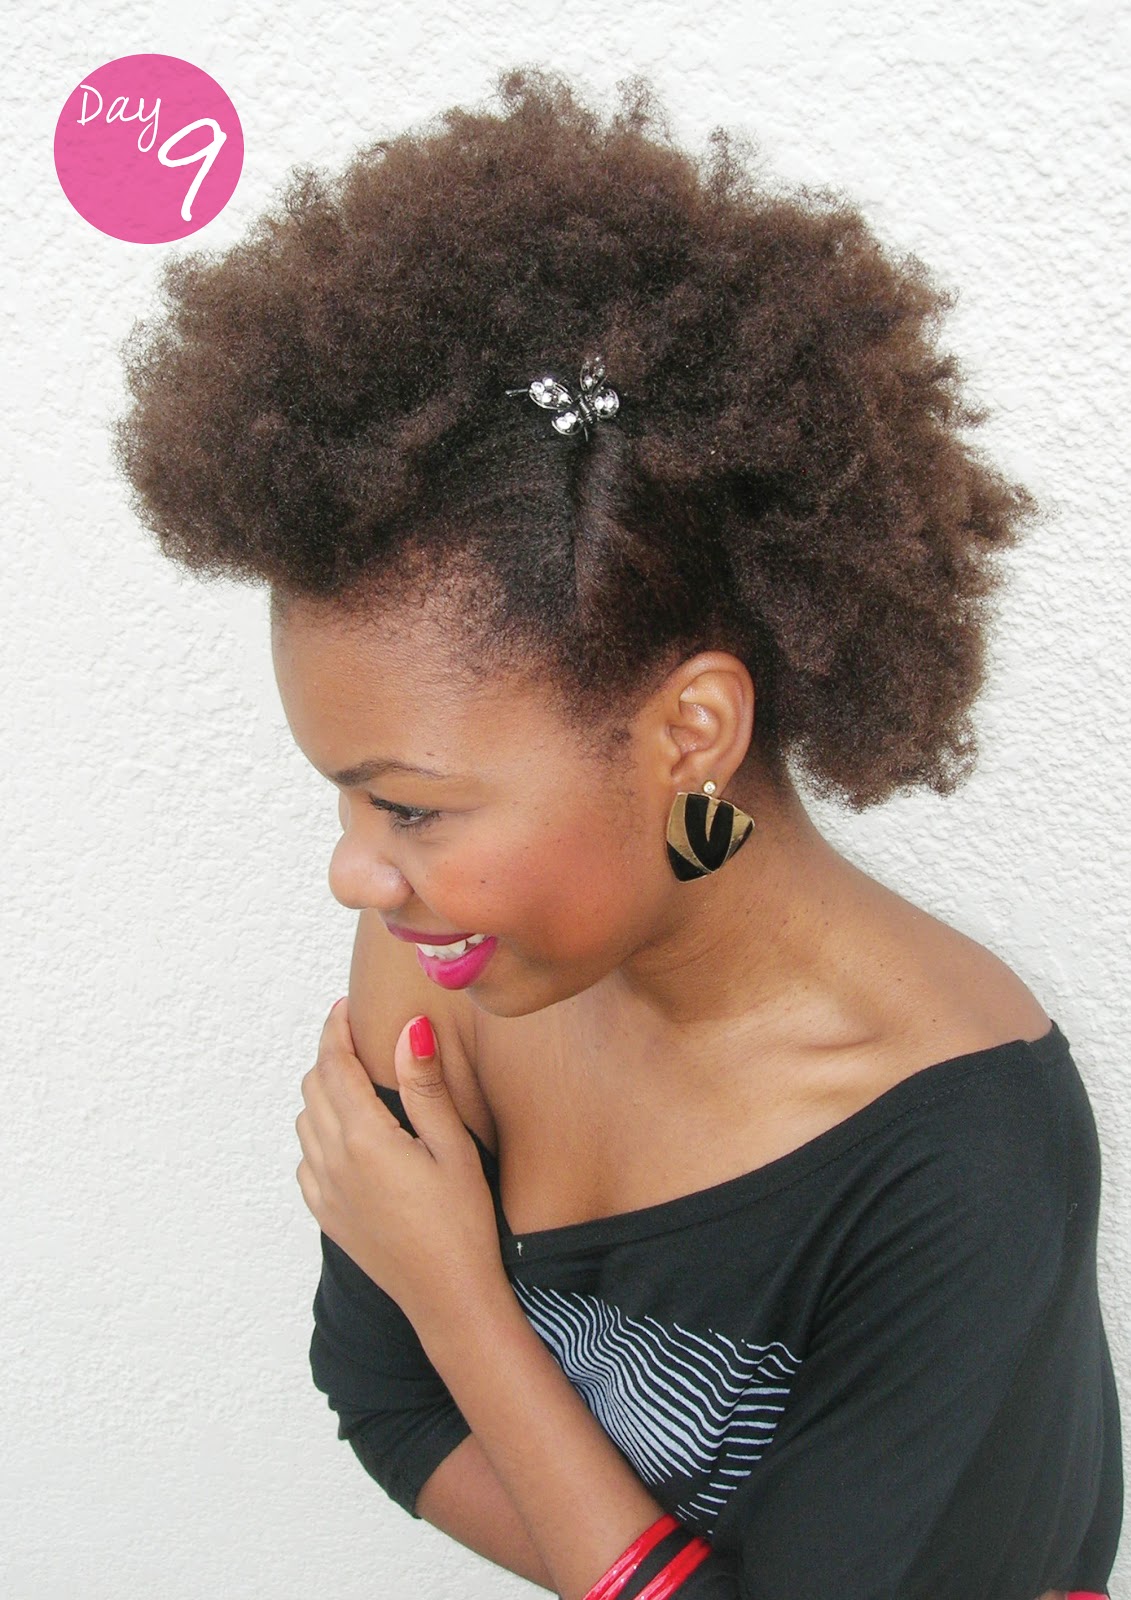 Video Post: What I Do - Styling Natural Hair with a Accessory 1 - Aisha &  Life